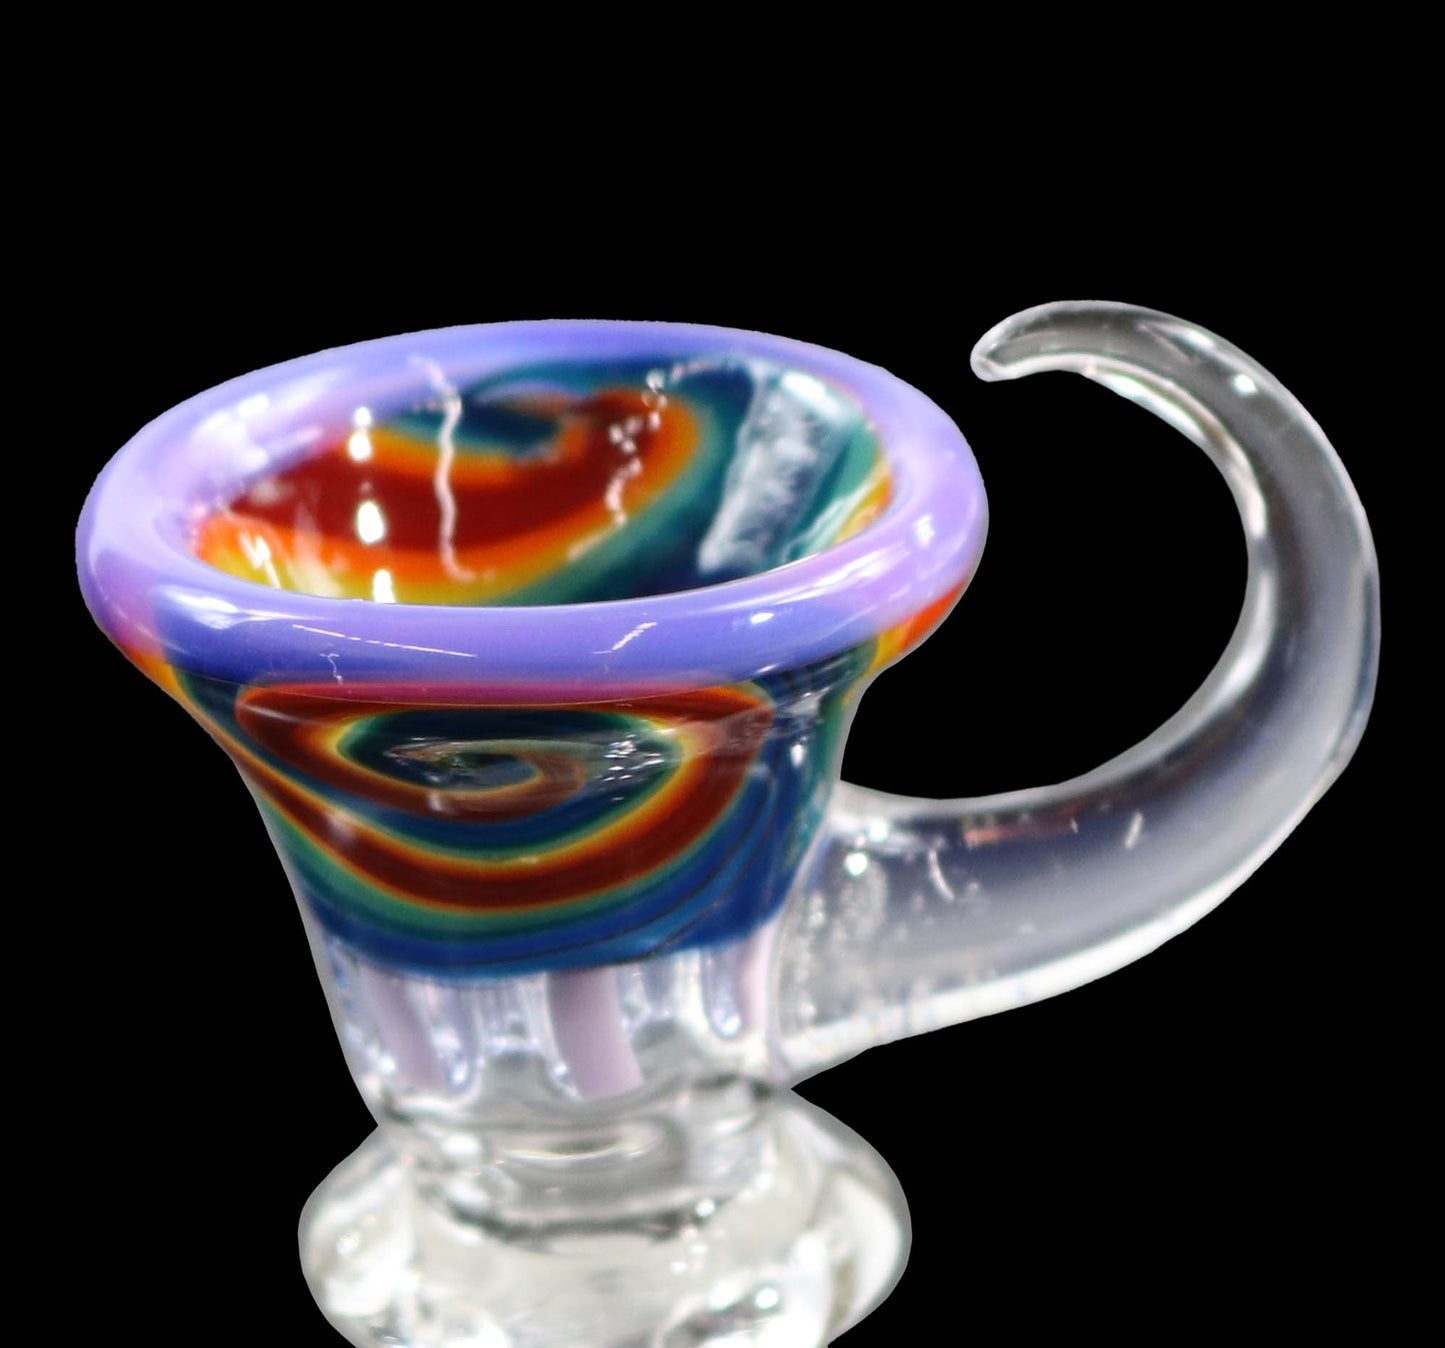 14mm Martini Bong Slide with built in colored screen from Glass by Slick - Rainbow w/ Purple